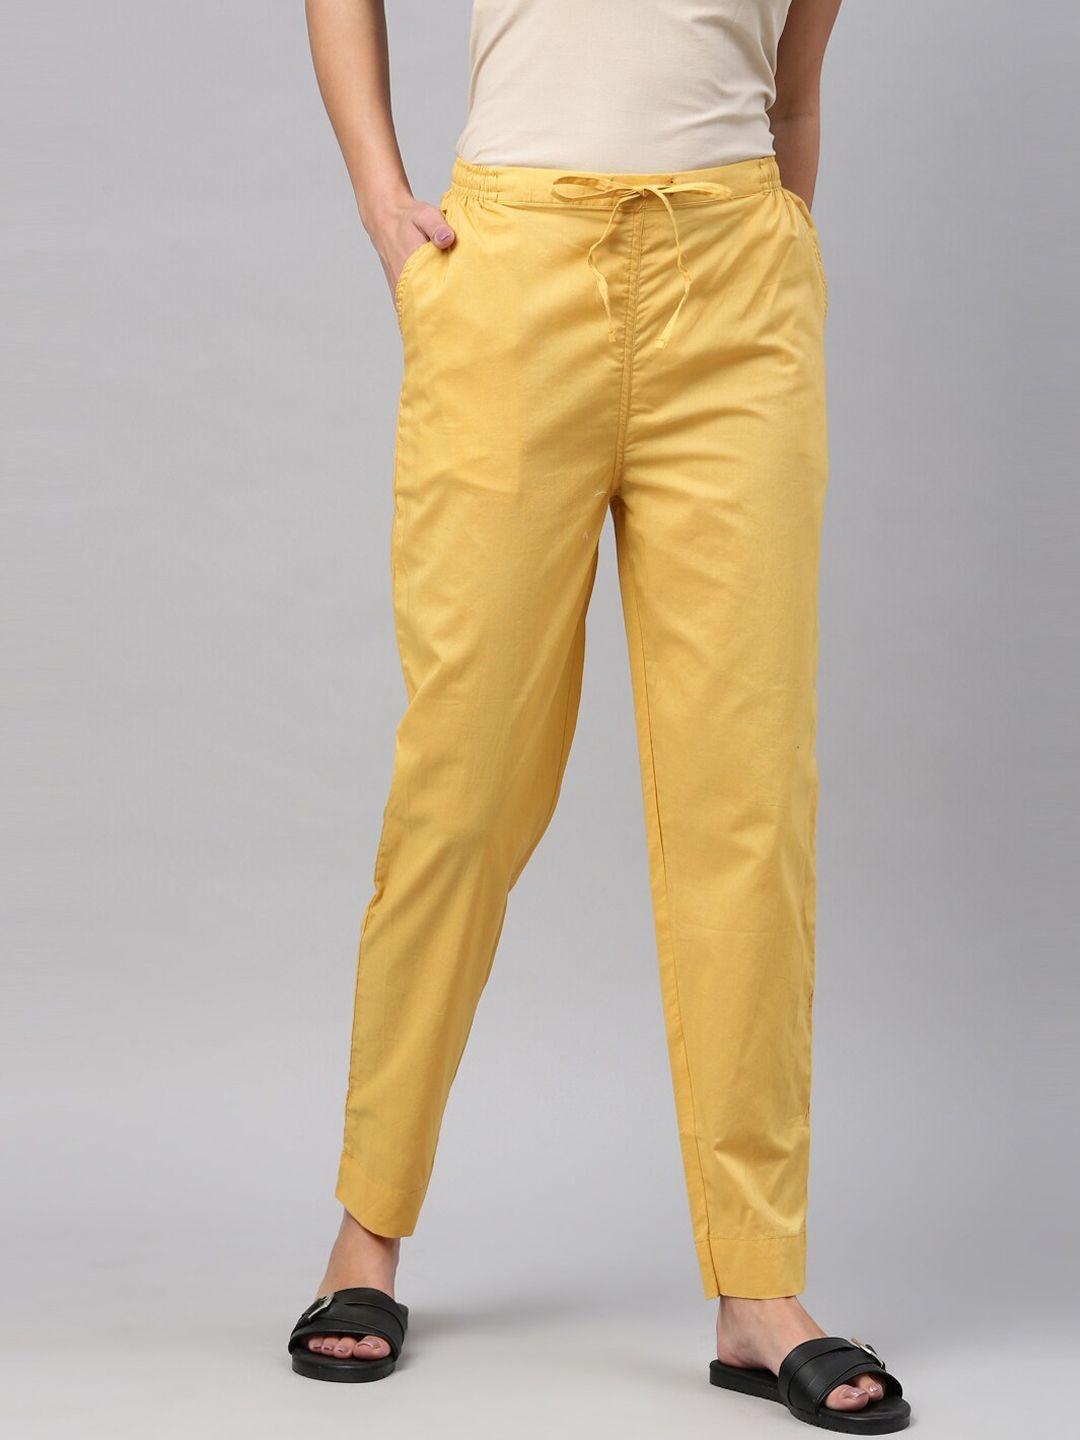 go colors women mustard yellow tapered fit chinos trousers